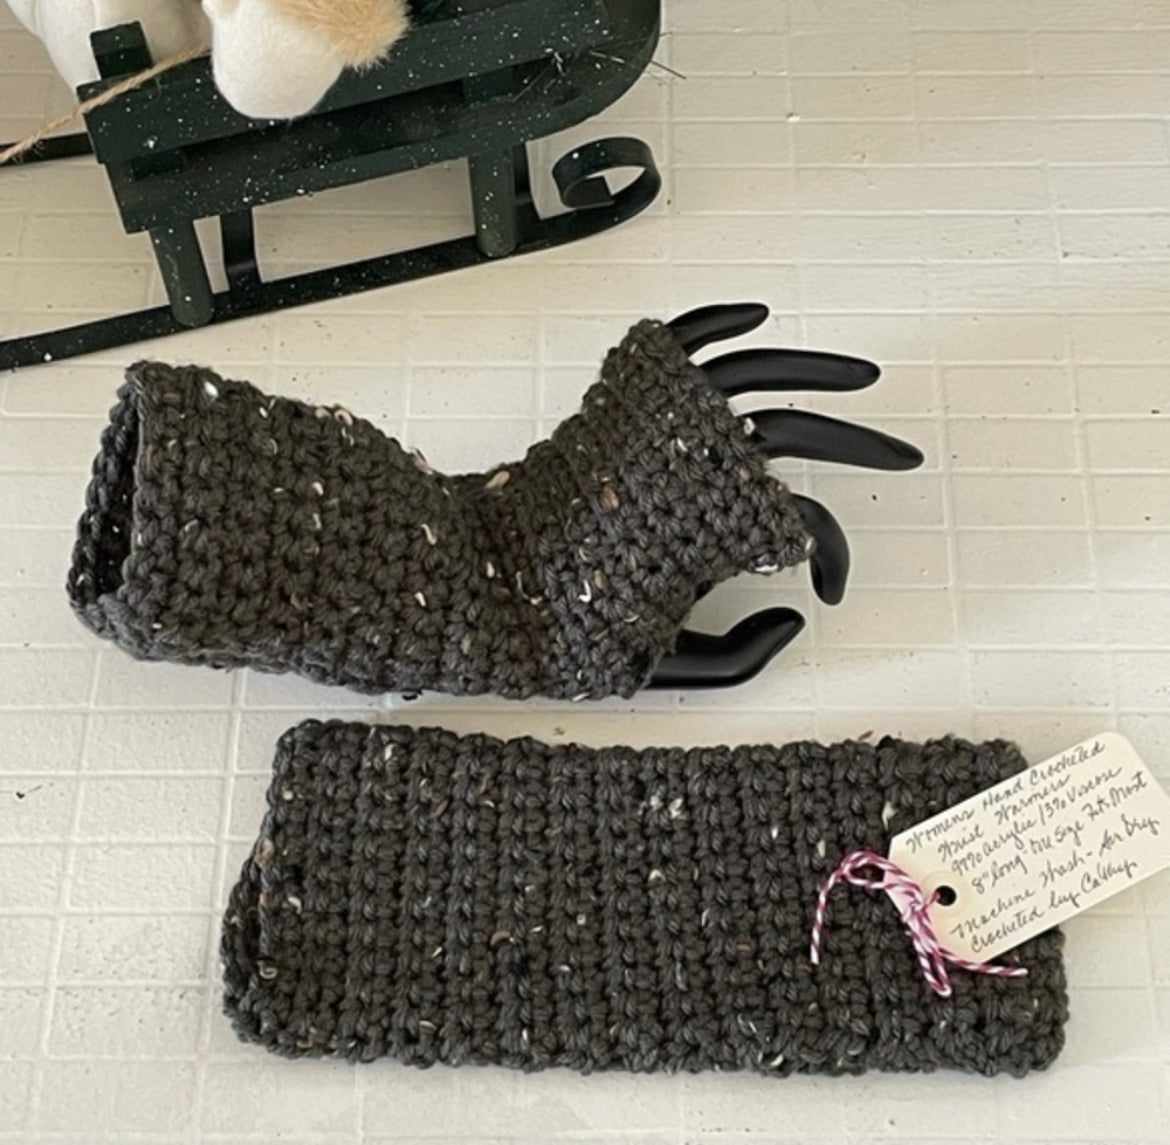 Texting Tech Wrist Warmers Charcoal Green Gray Speckled Tweed Crochet Knit Fall Winter Writing Gaming Fingerless Gloves